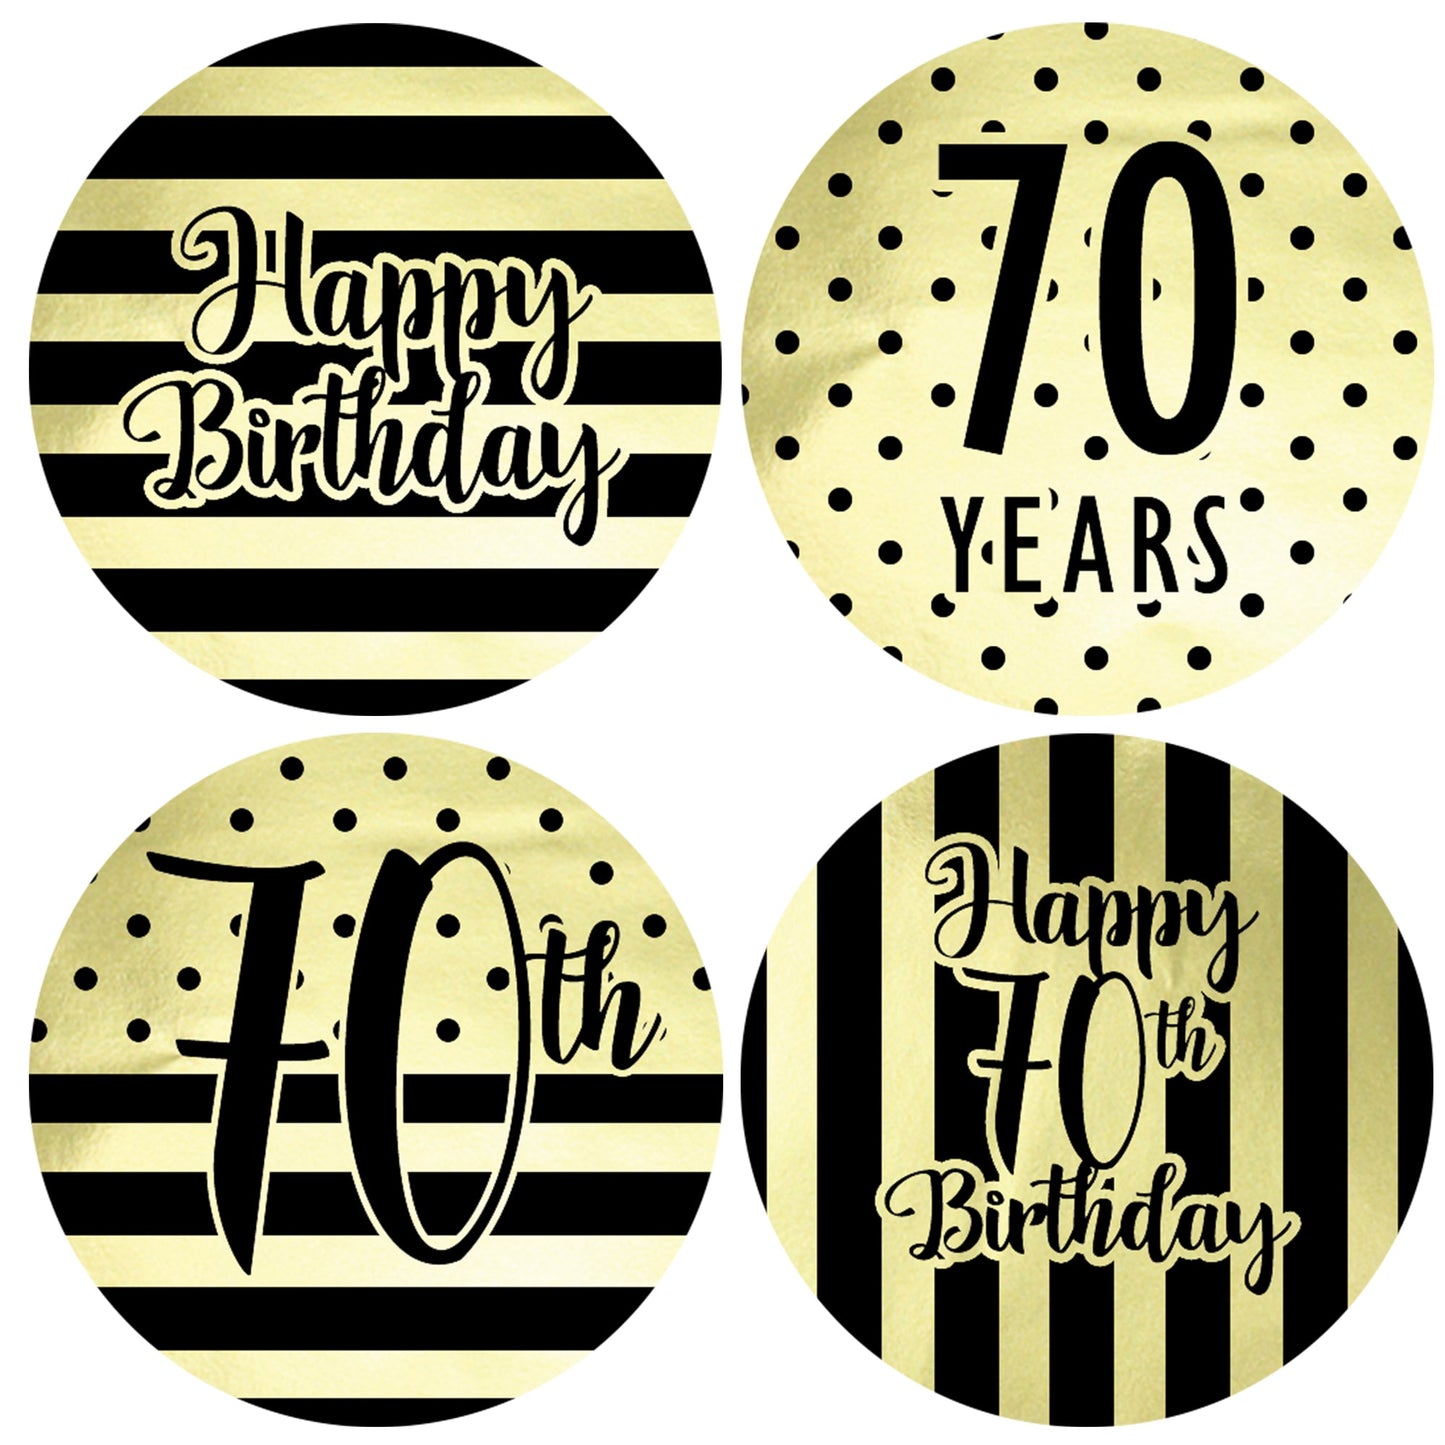 Make your 70th birthday extra special with these 40 black and gold party circle labels!